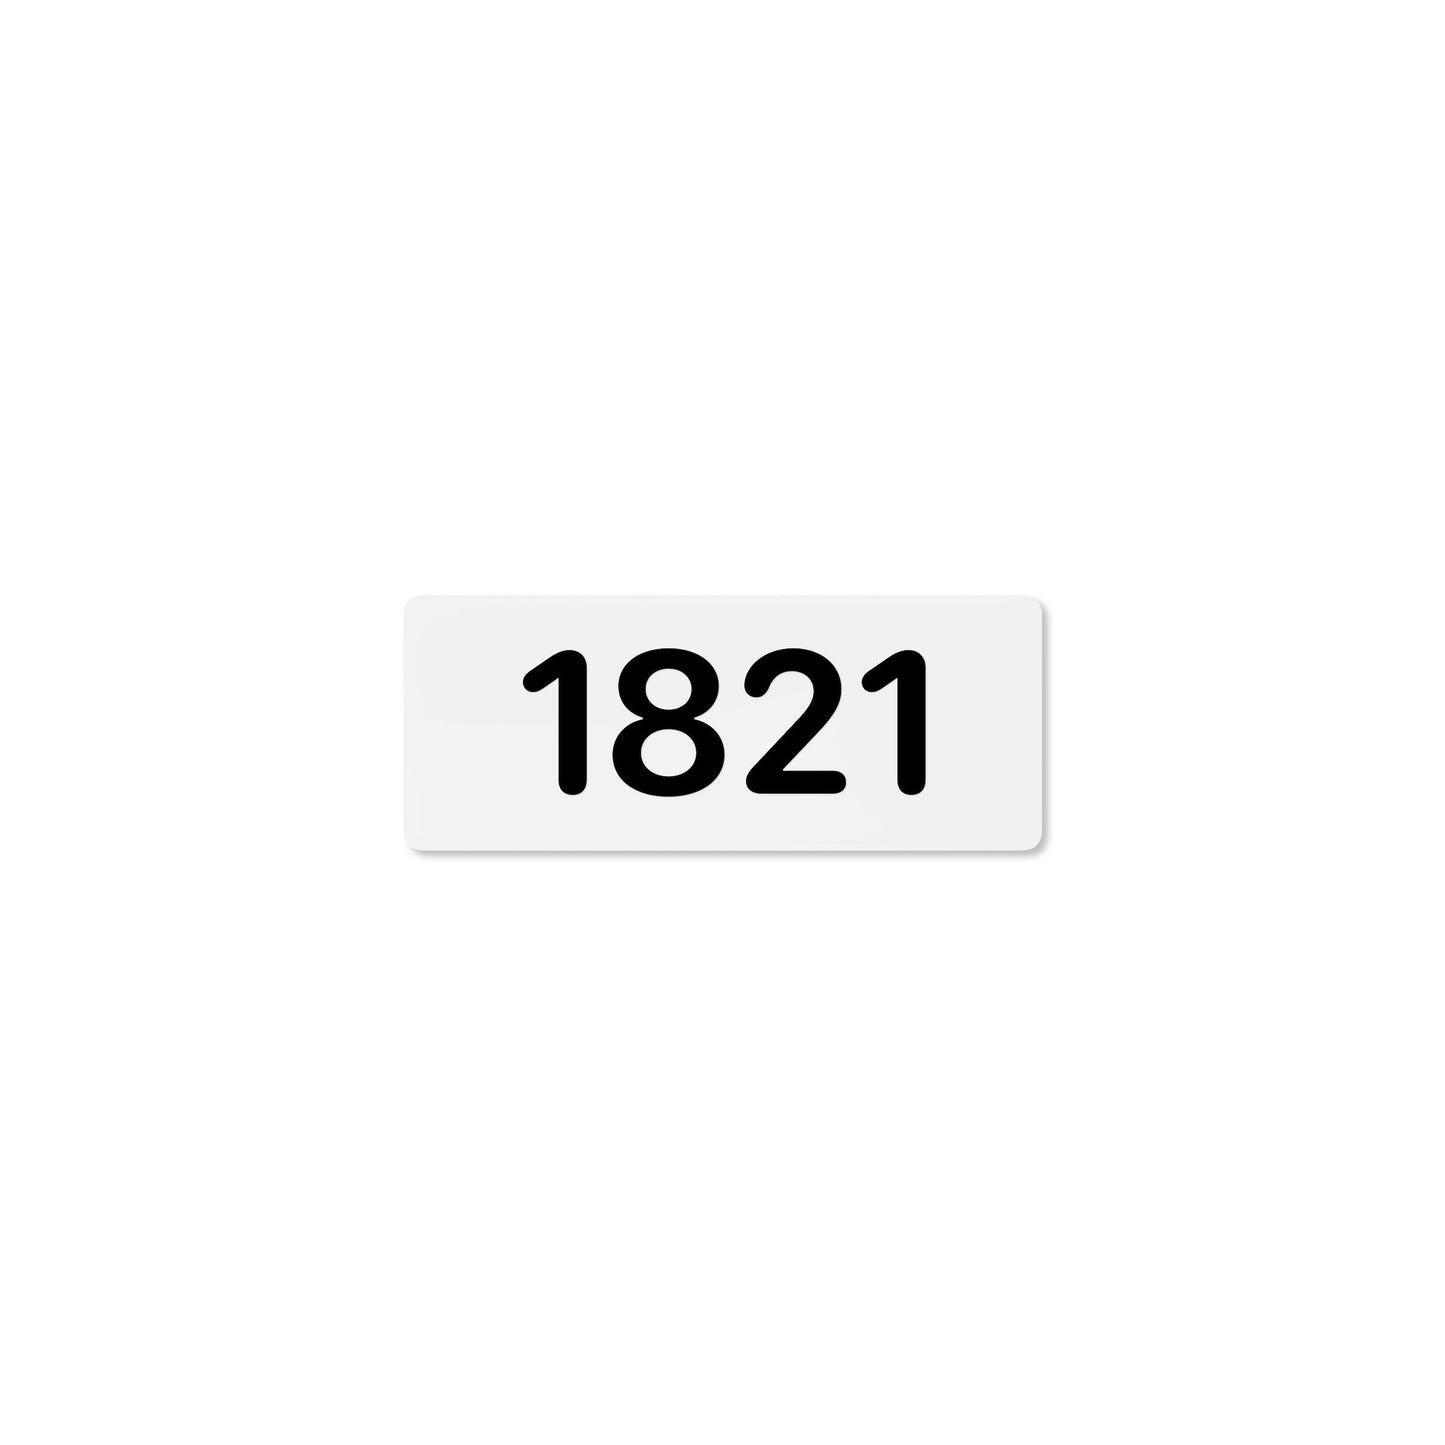 Numeral 1821